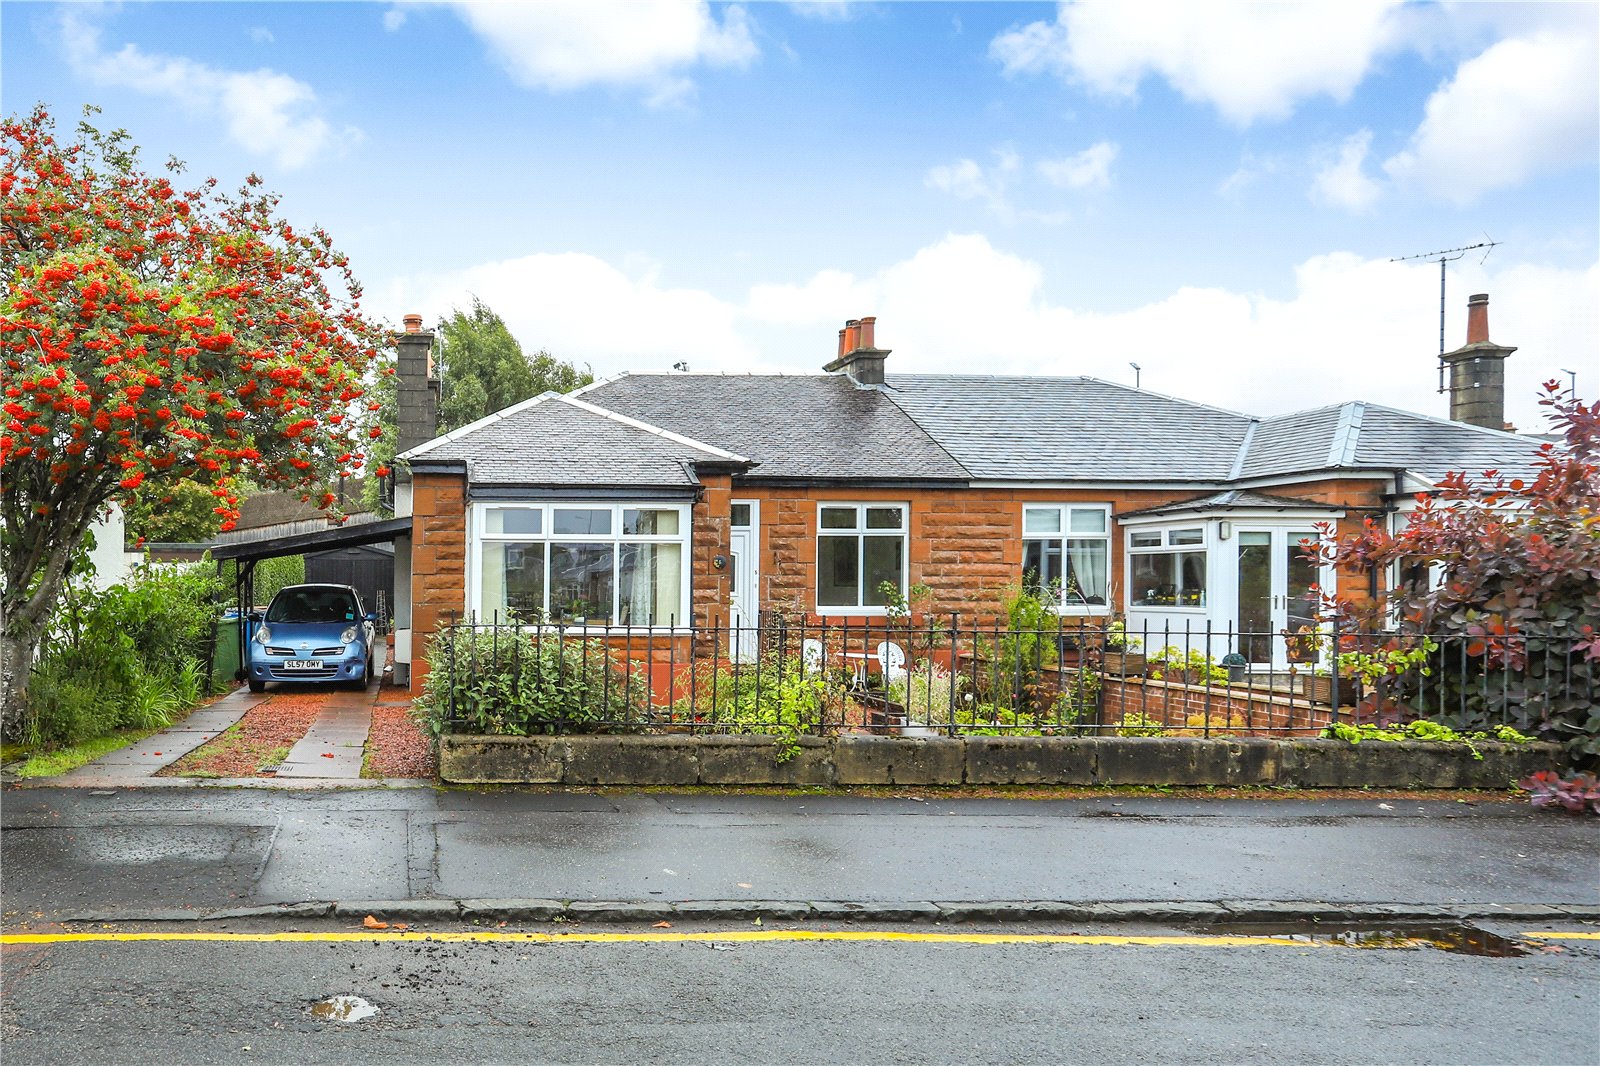 Our latest properties for sale and to let (11th September 2019)